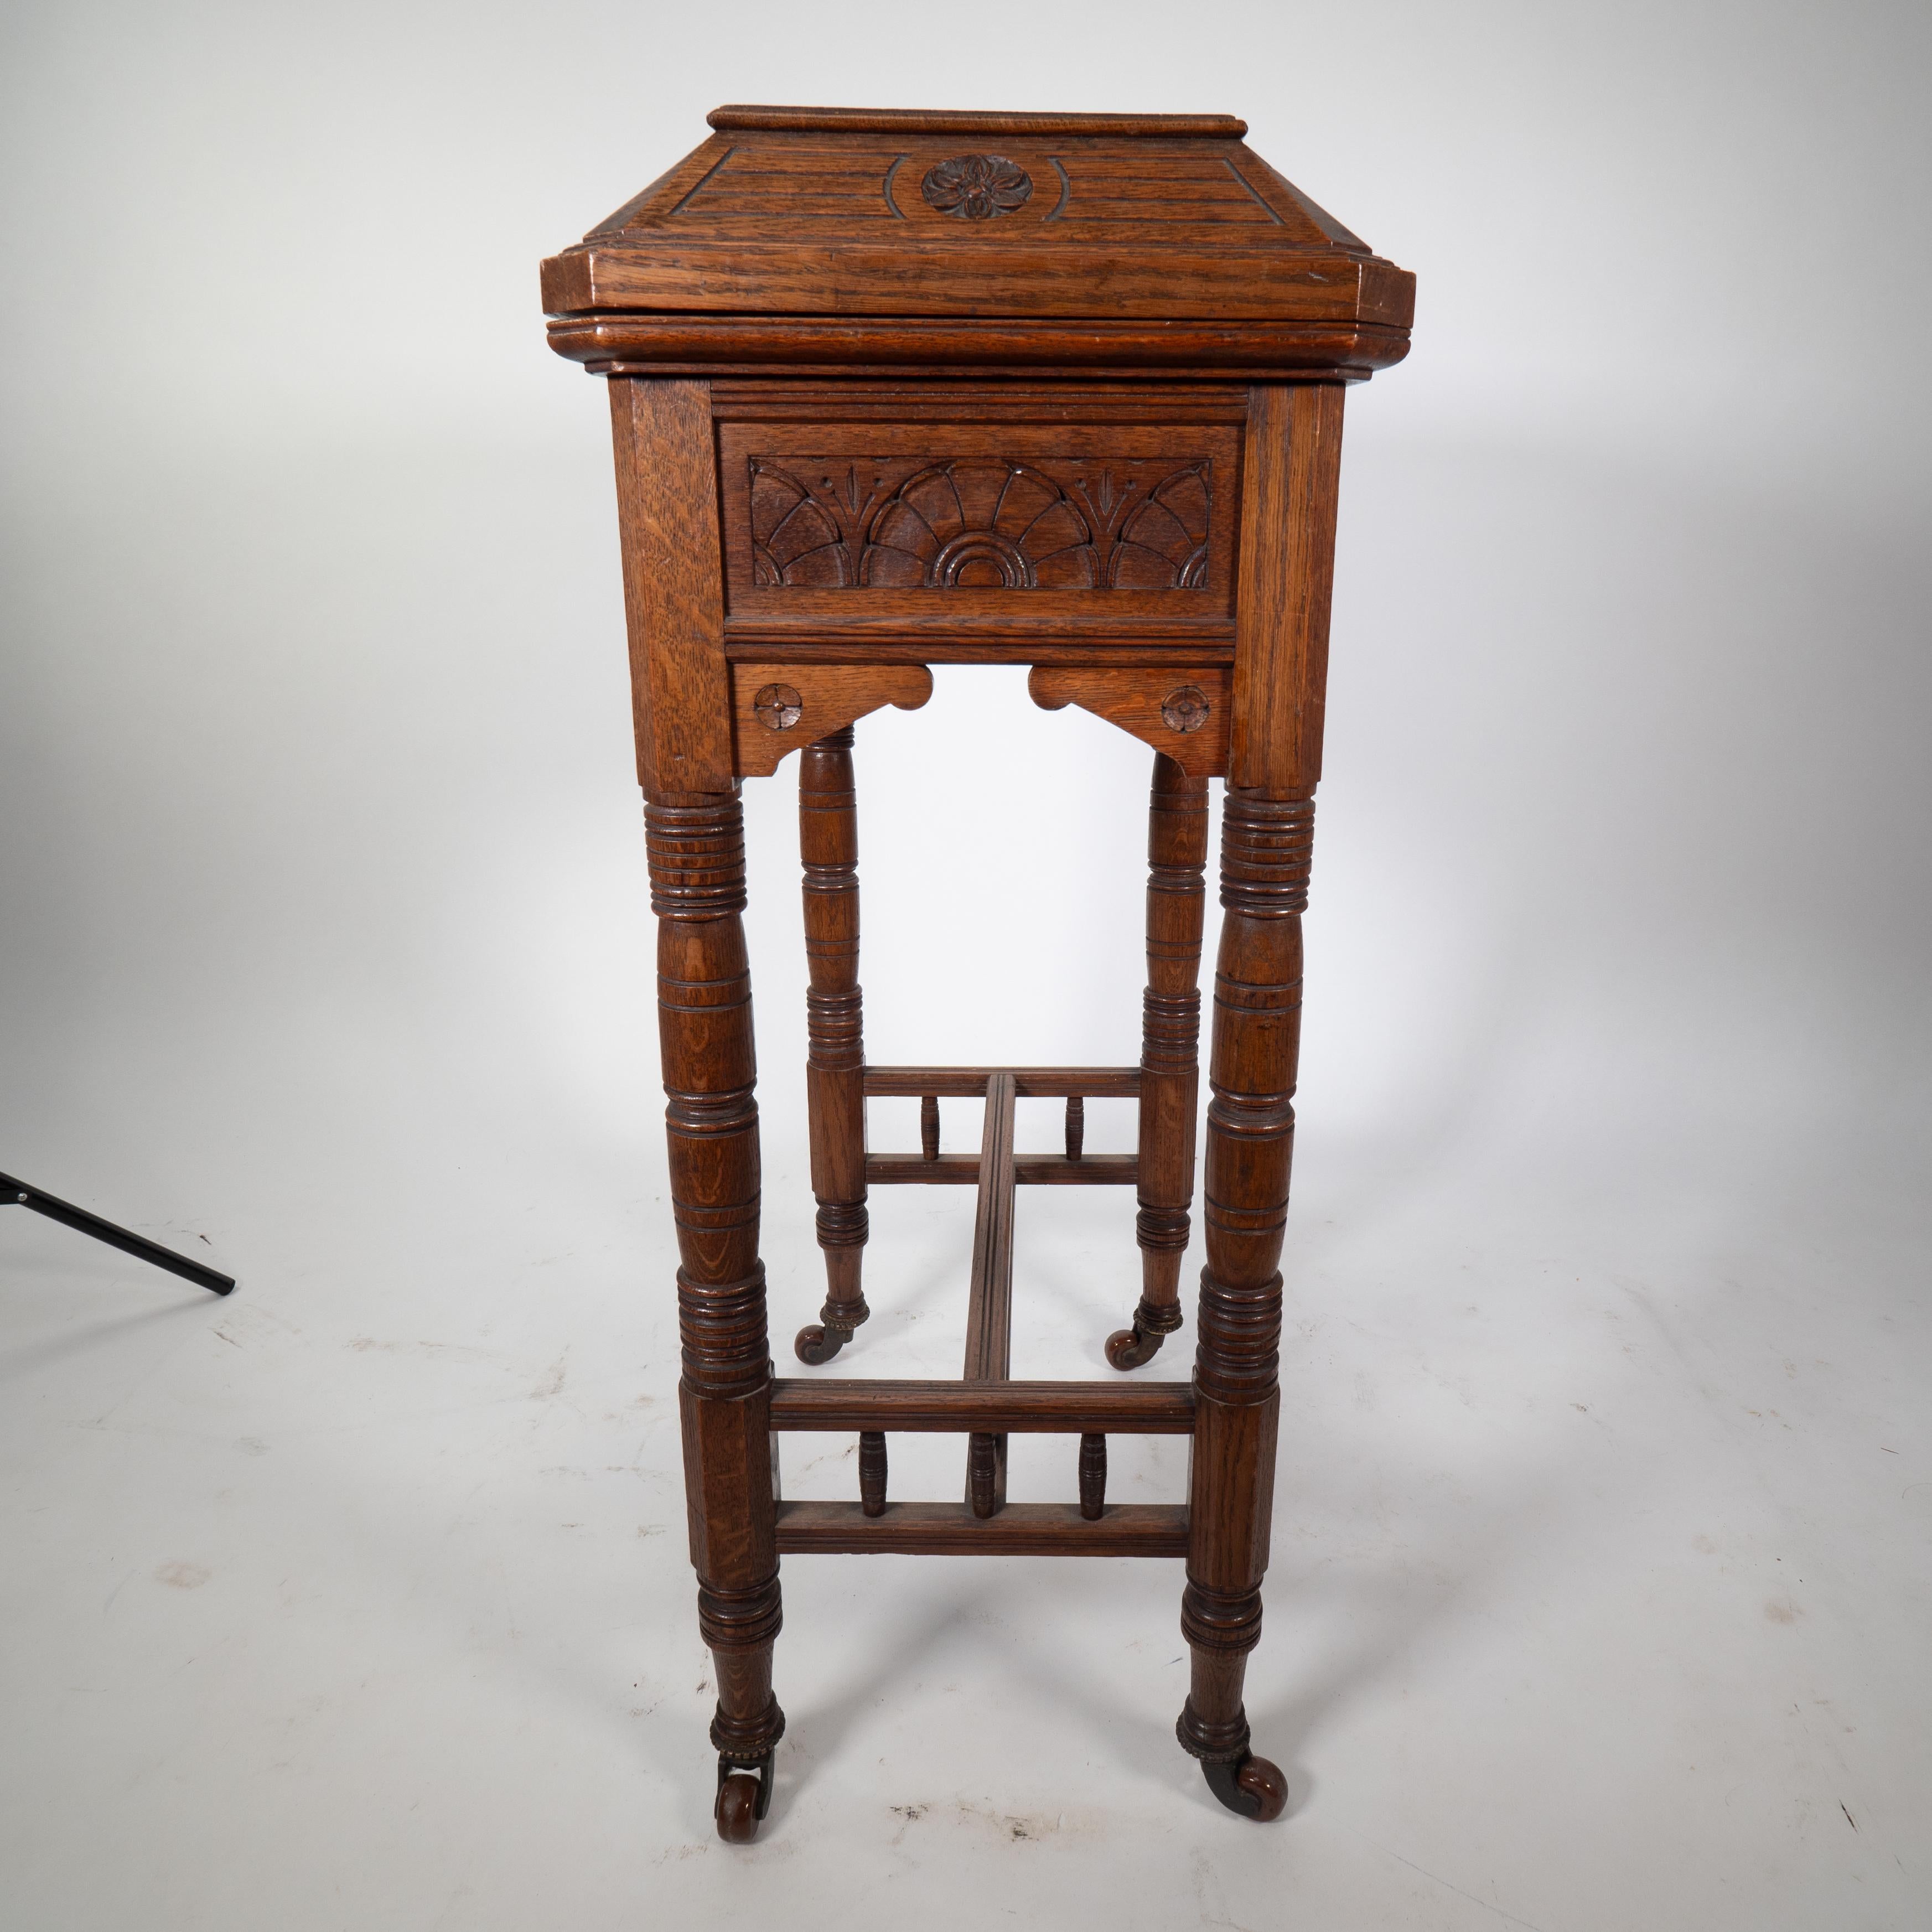 Bruce Talbert An Aesthetic Movement Gothic Revival oak needlework table and box In Good Condition For Sale In London, GB